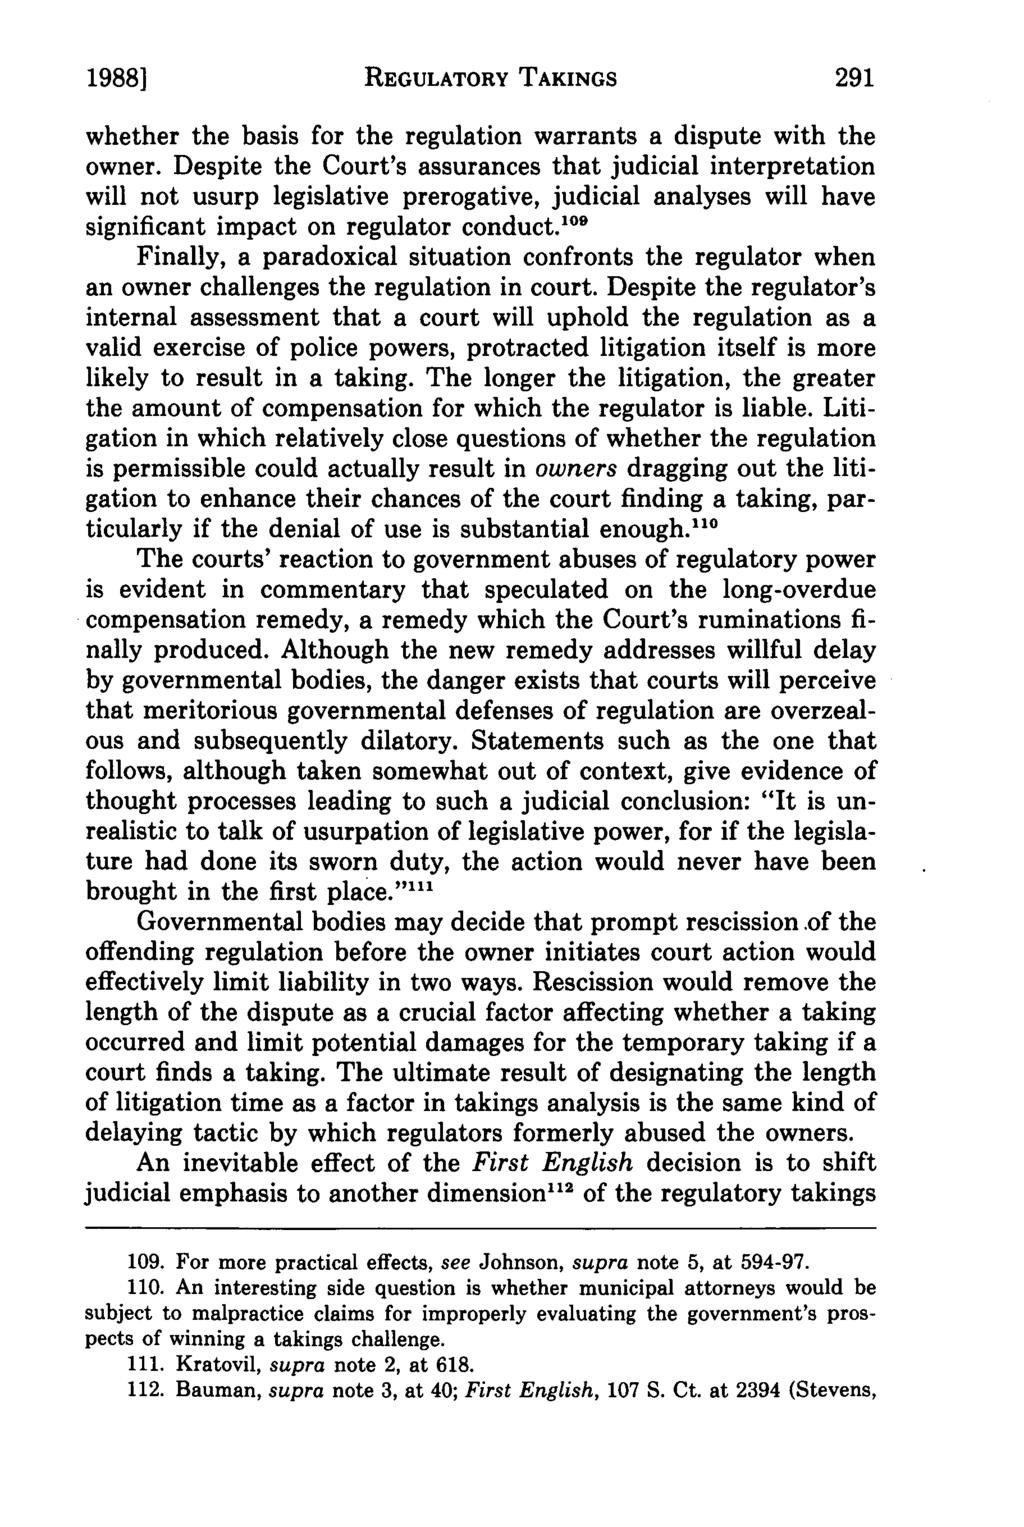 1988] Woodard: Constitutional Law: Is Time Running out for the Government to Dis REGULATORY TAKINGS whether the basis for the regulation warrants a dispute with the owner.